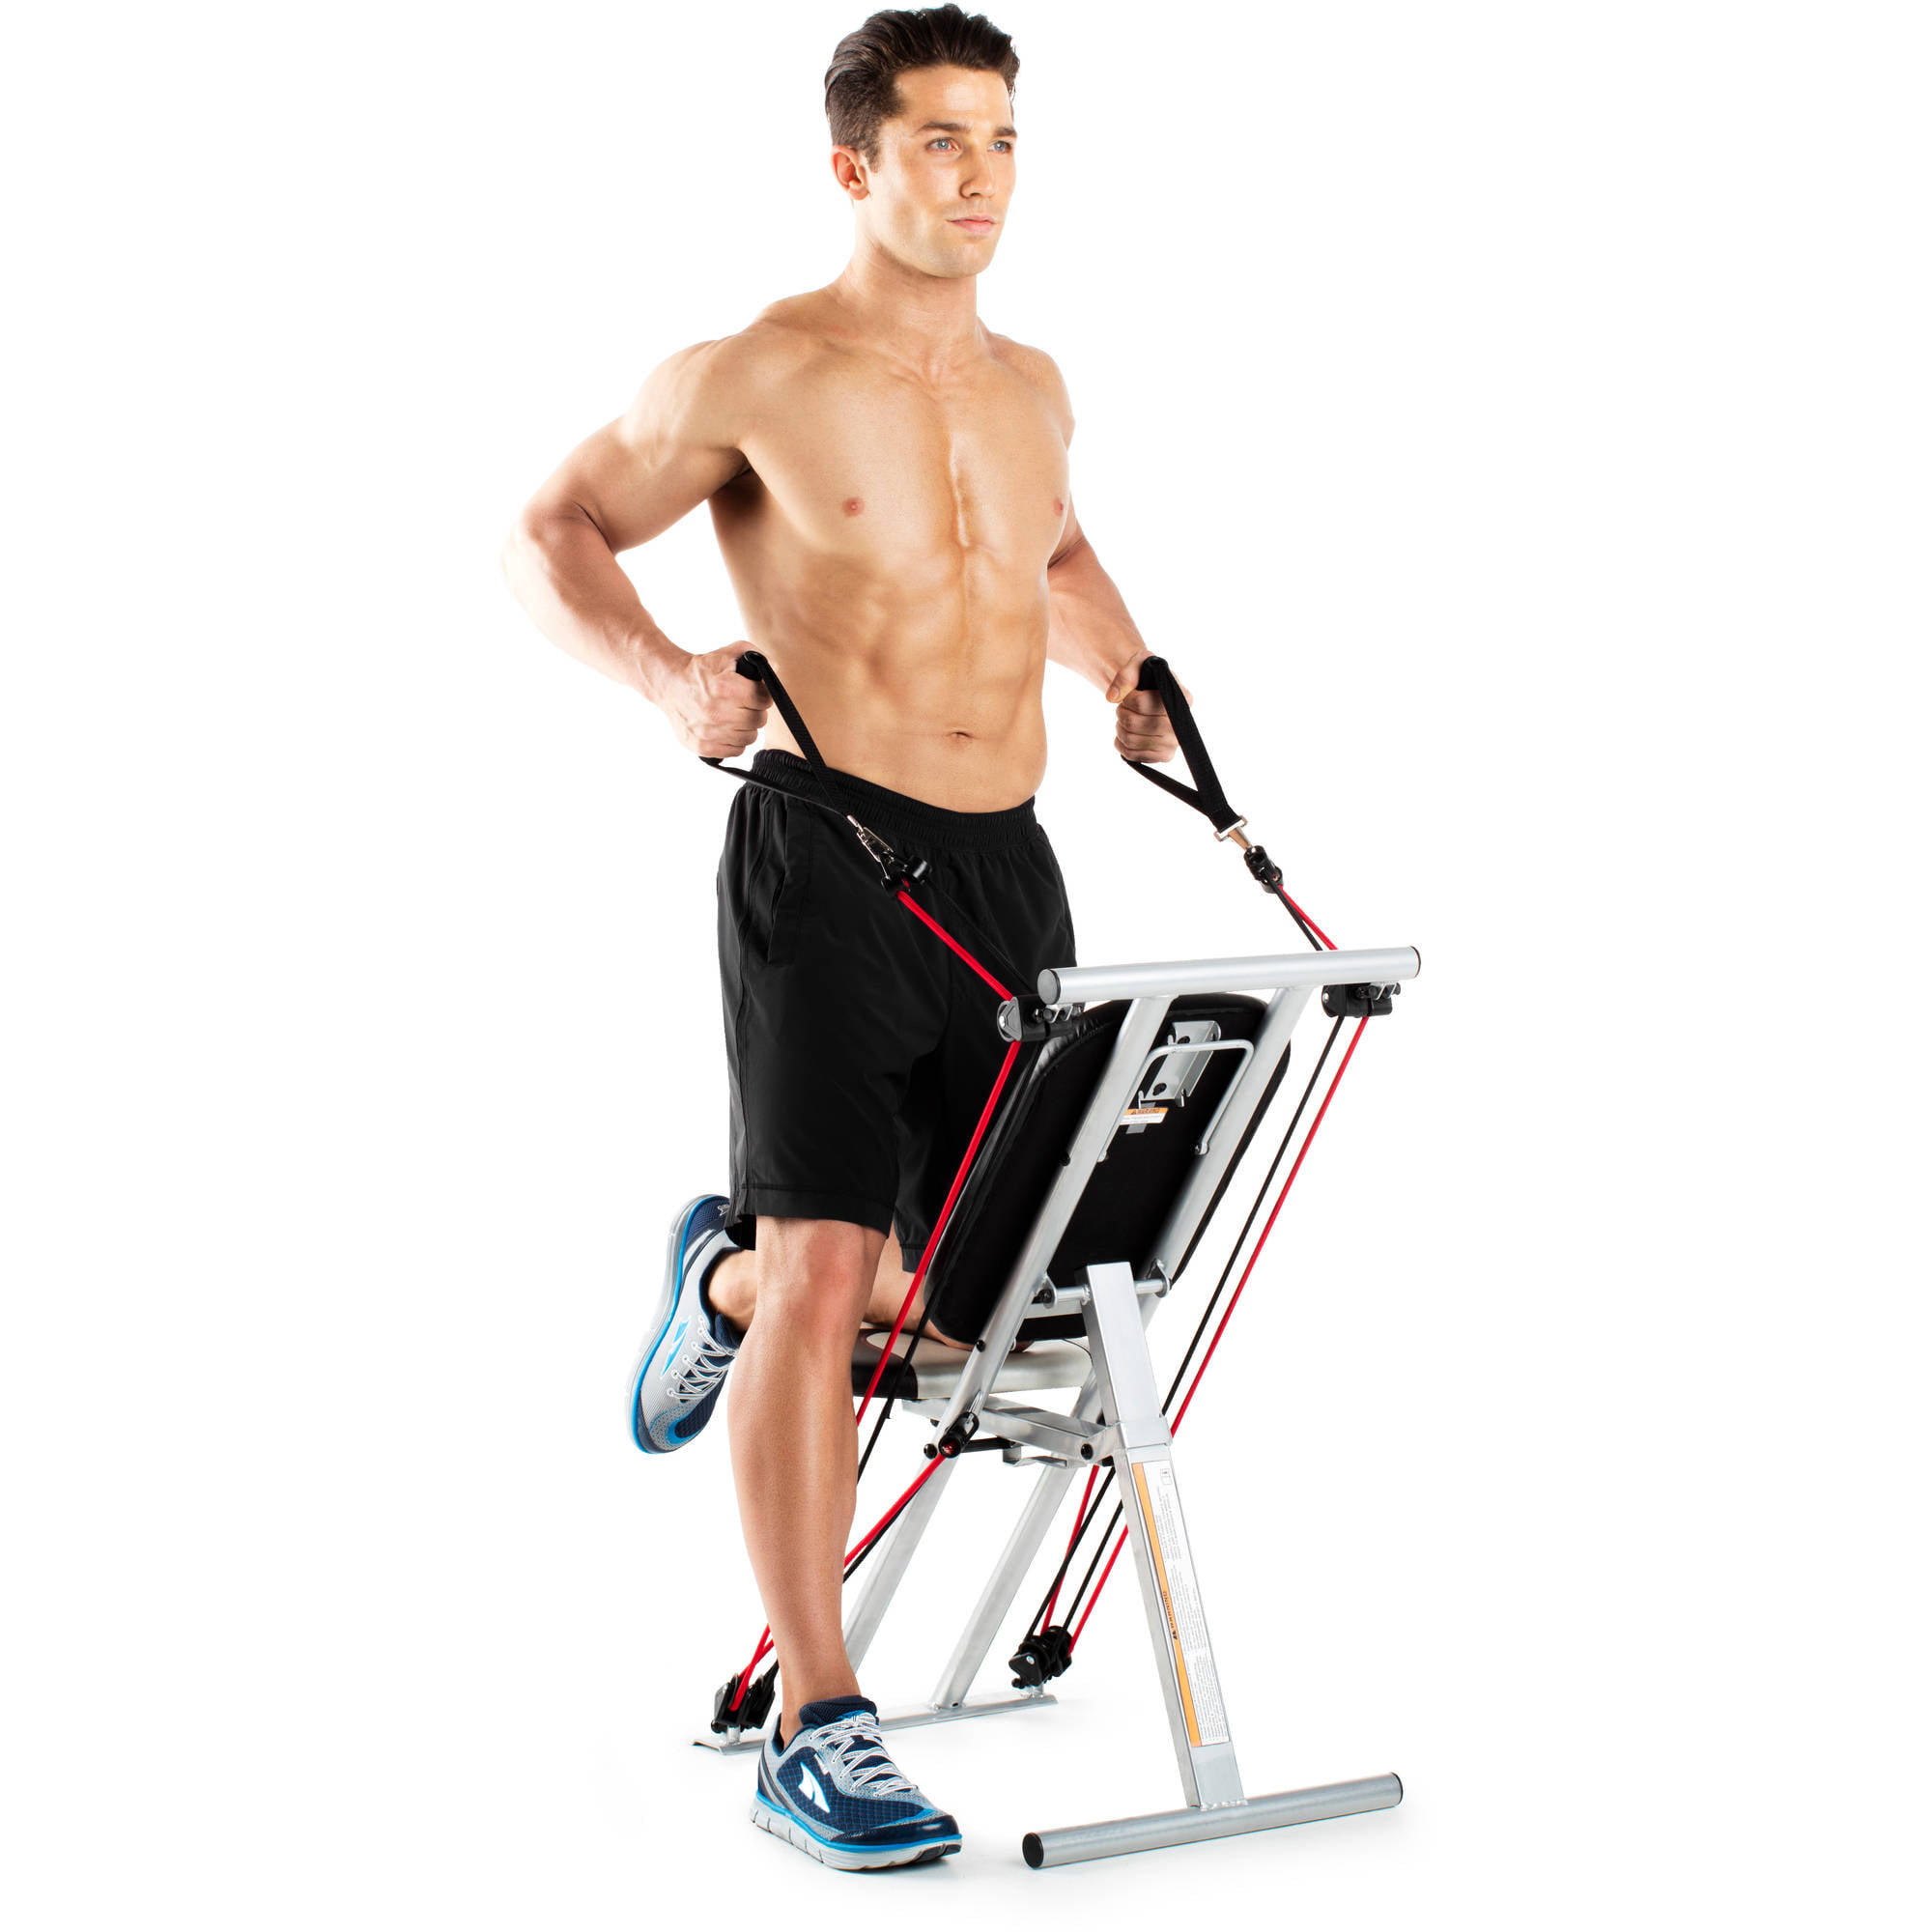 30 Minute Weider Machine Workout for Burn Fat fast